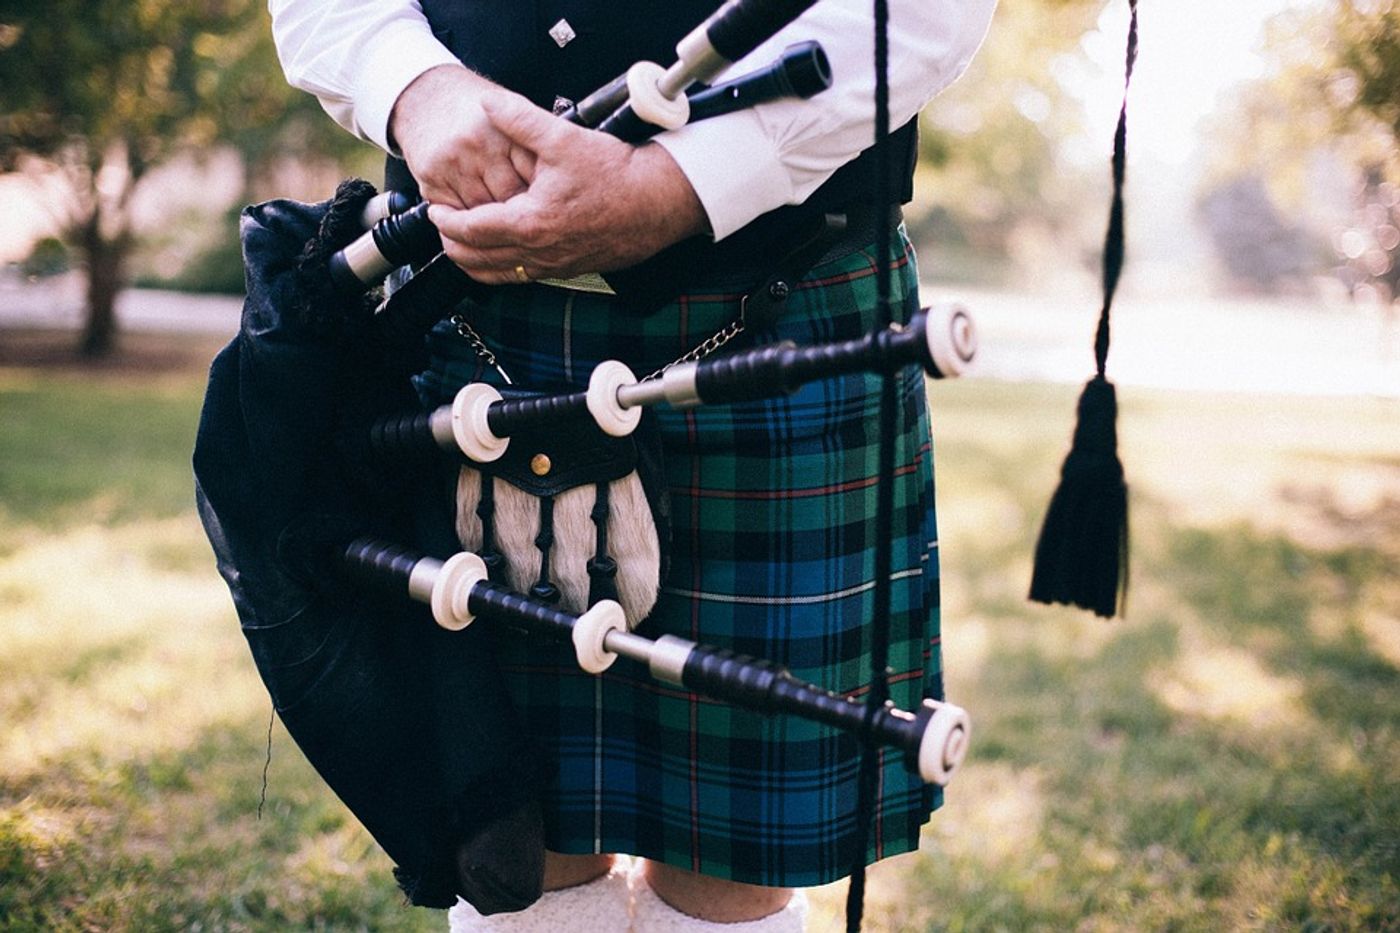 Bagpipe lung: A new type of lung disease? | Image: pixabay.com